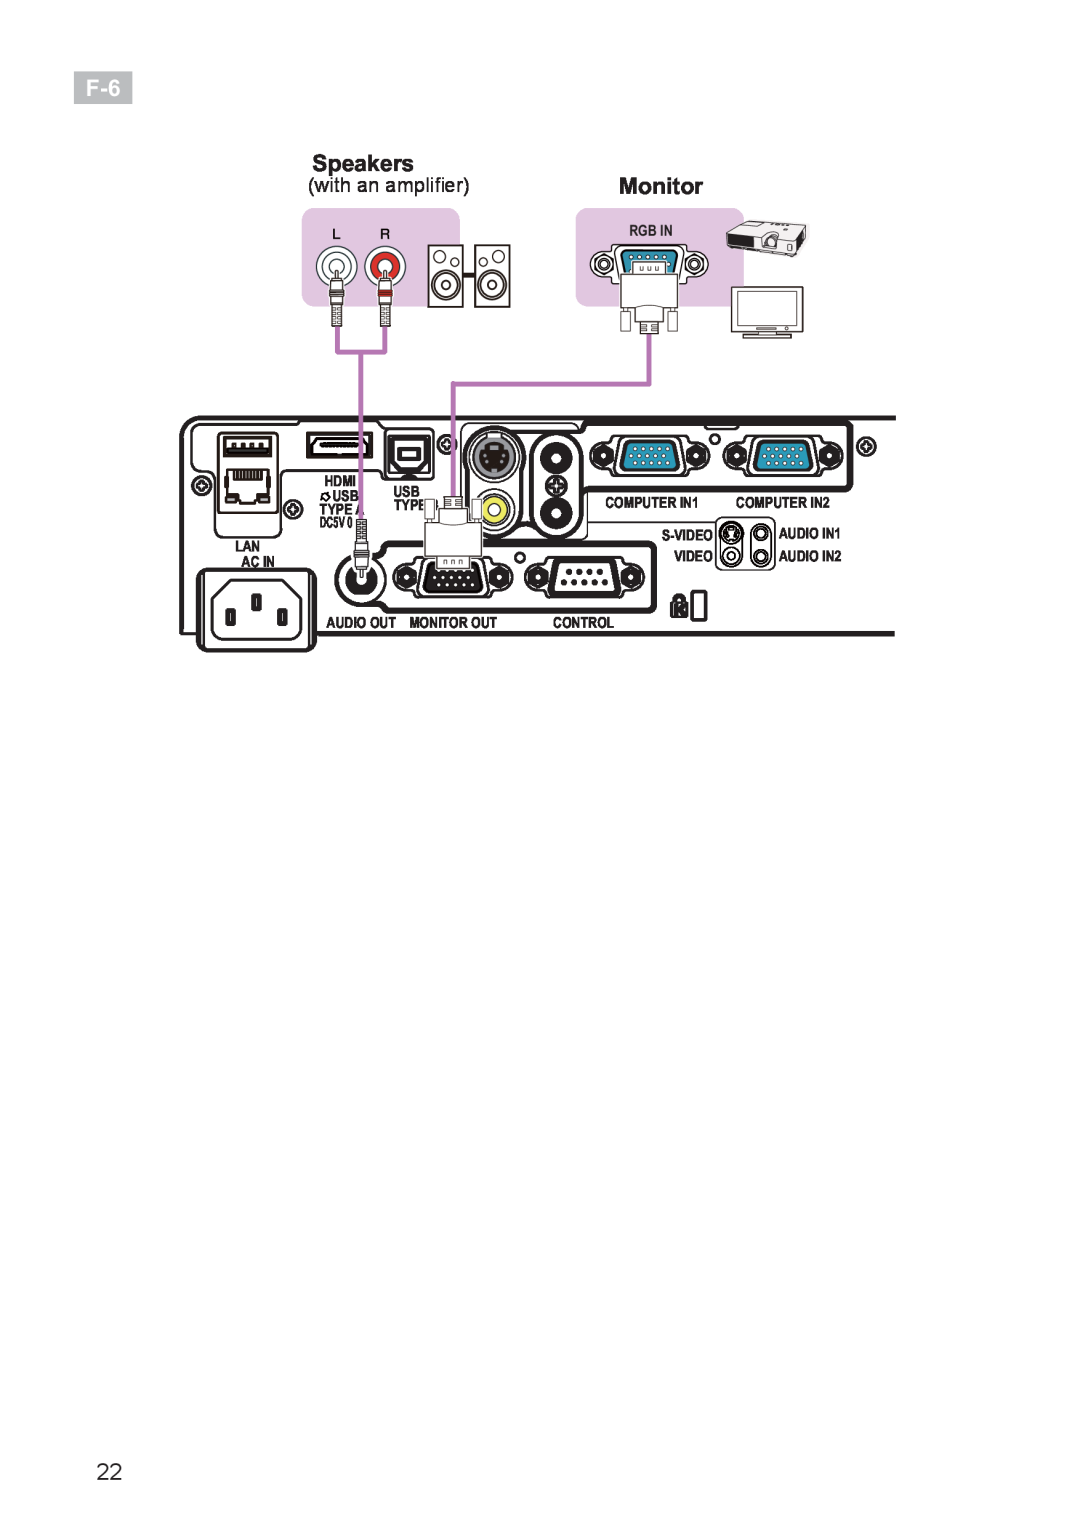 Hitachi CP-X2521WN user manual with an amplier, Rgb In, Hdmi, Type A, DC5V 0.5A, Lan Ac In, S-Video, Audio Out Monitor Out 